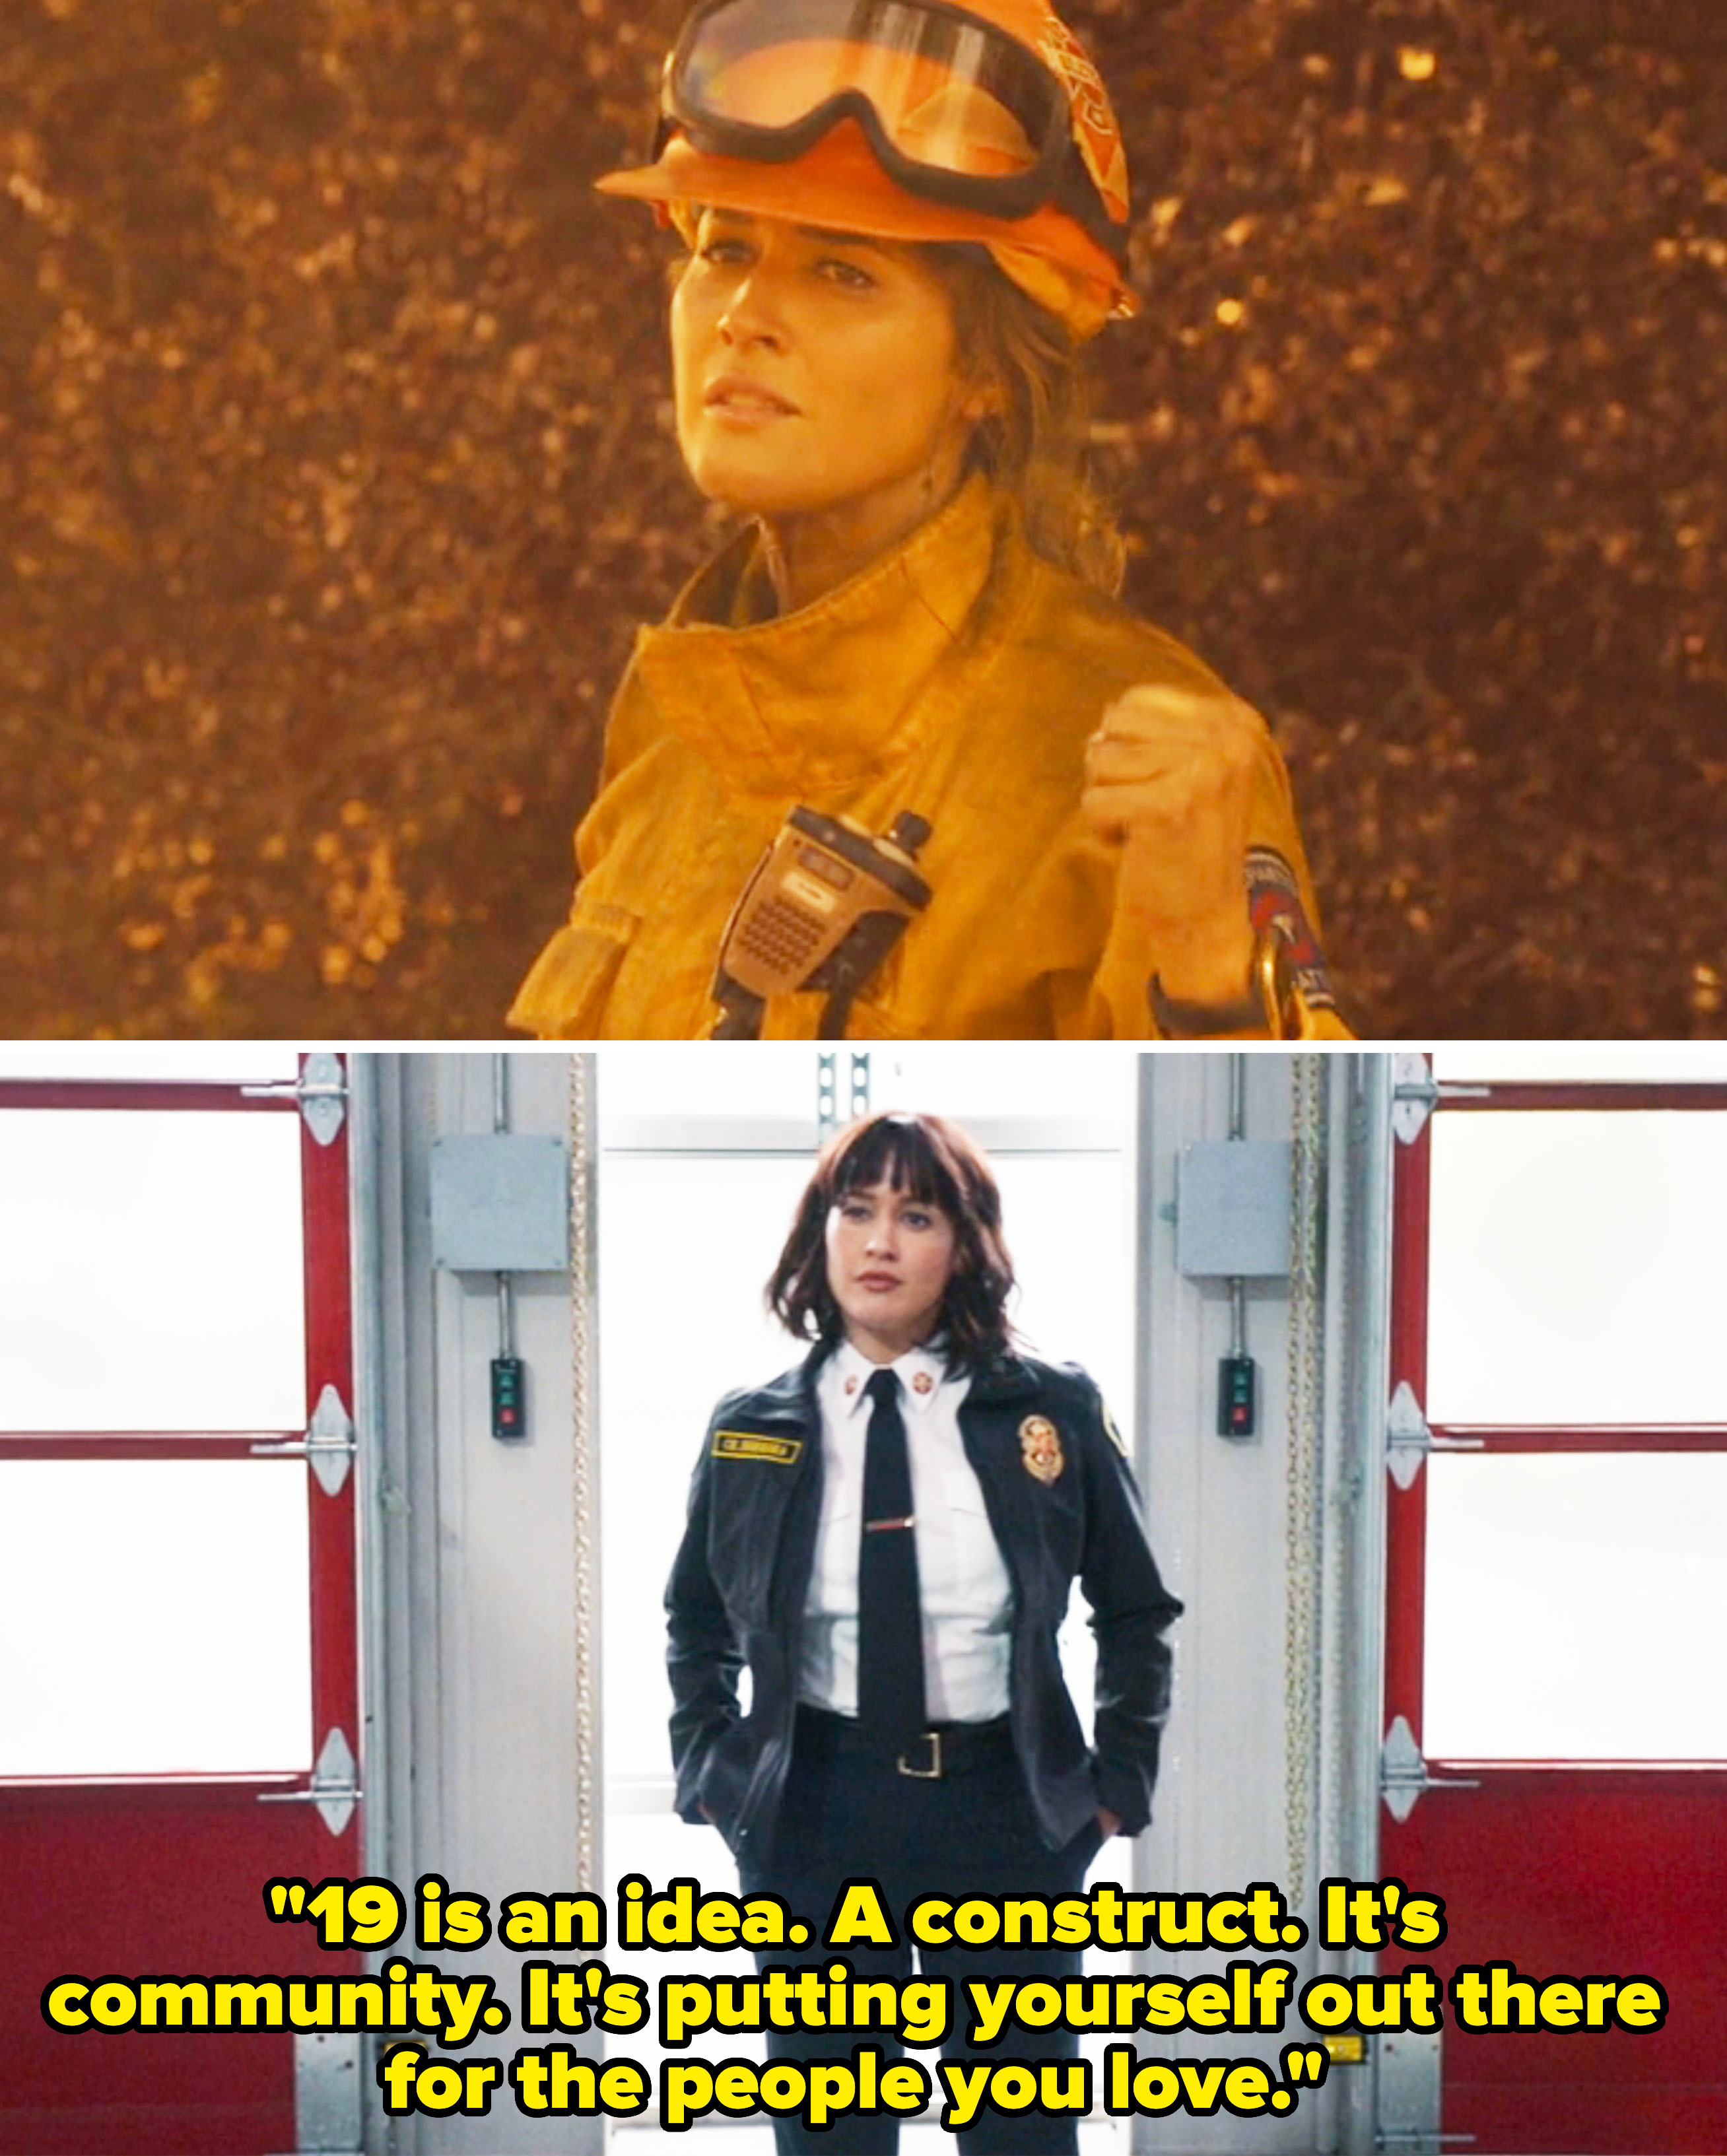 Andy in a firefighter uniform vs. Andy in the future as Captain